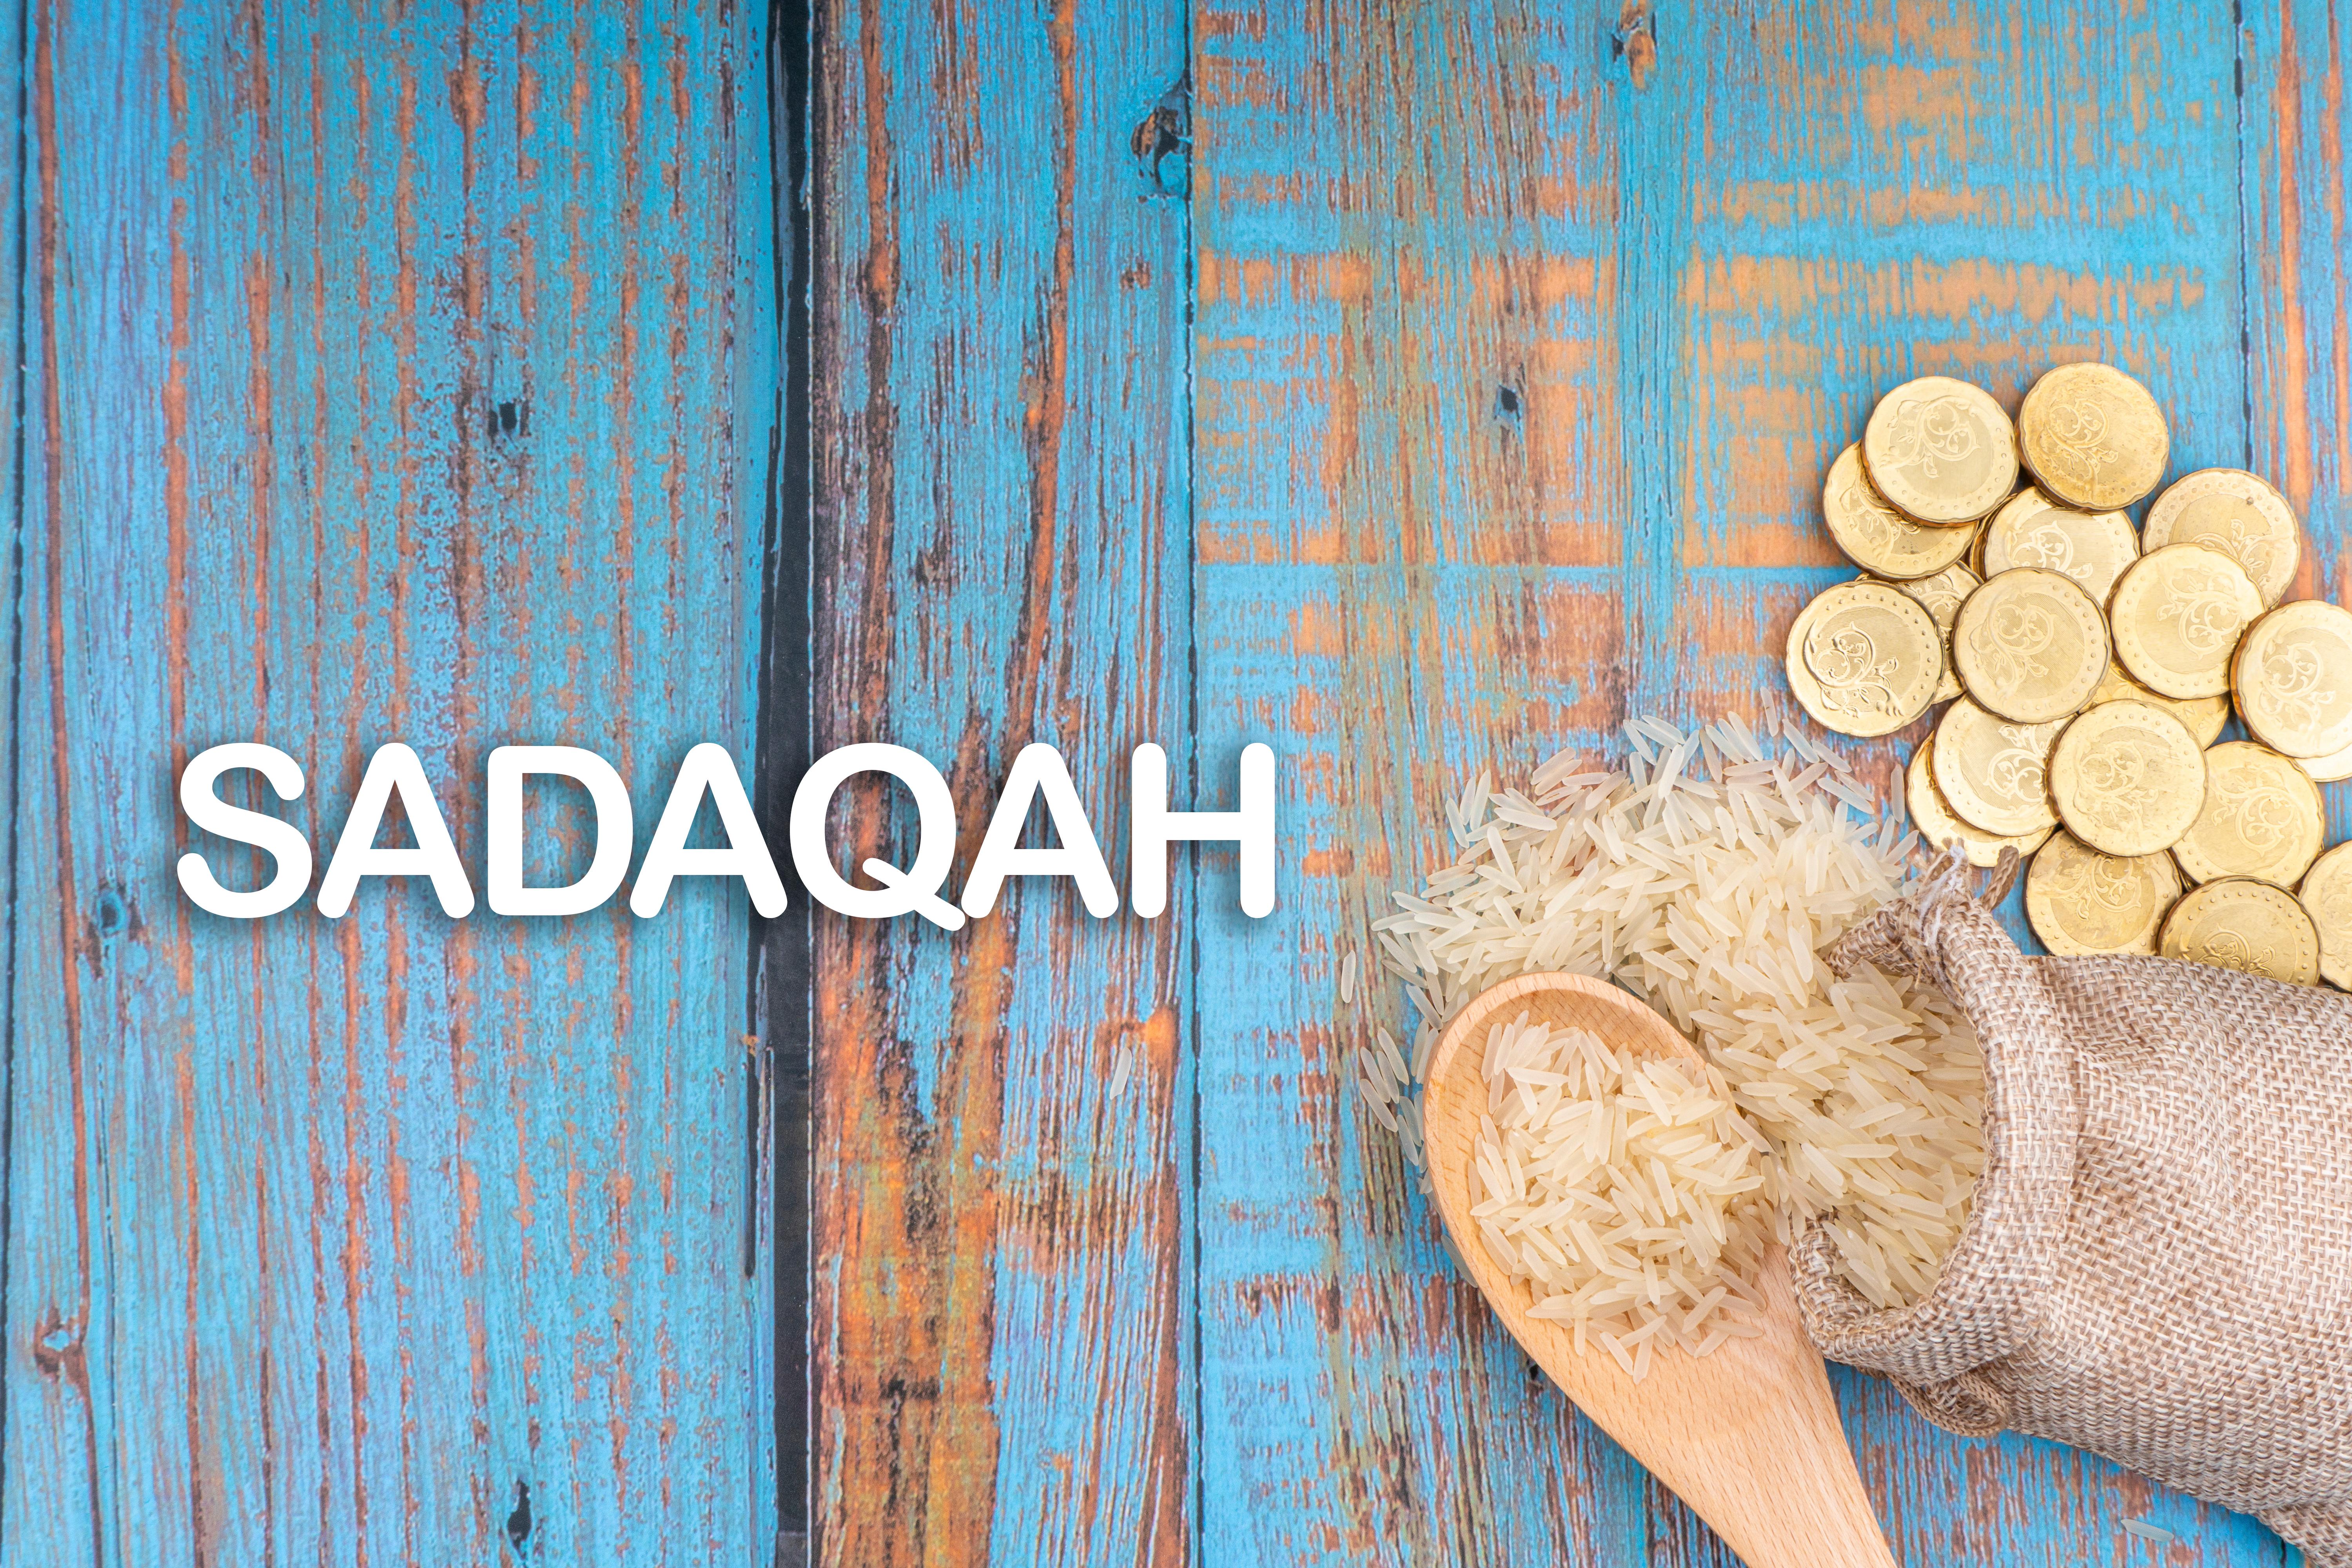 What We Can Learn from Sadaqah Quotes in Ramadan 